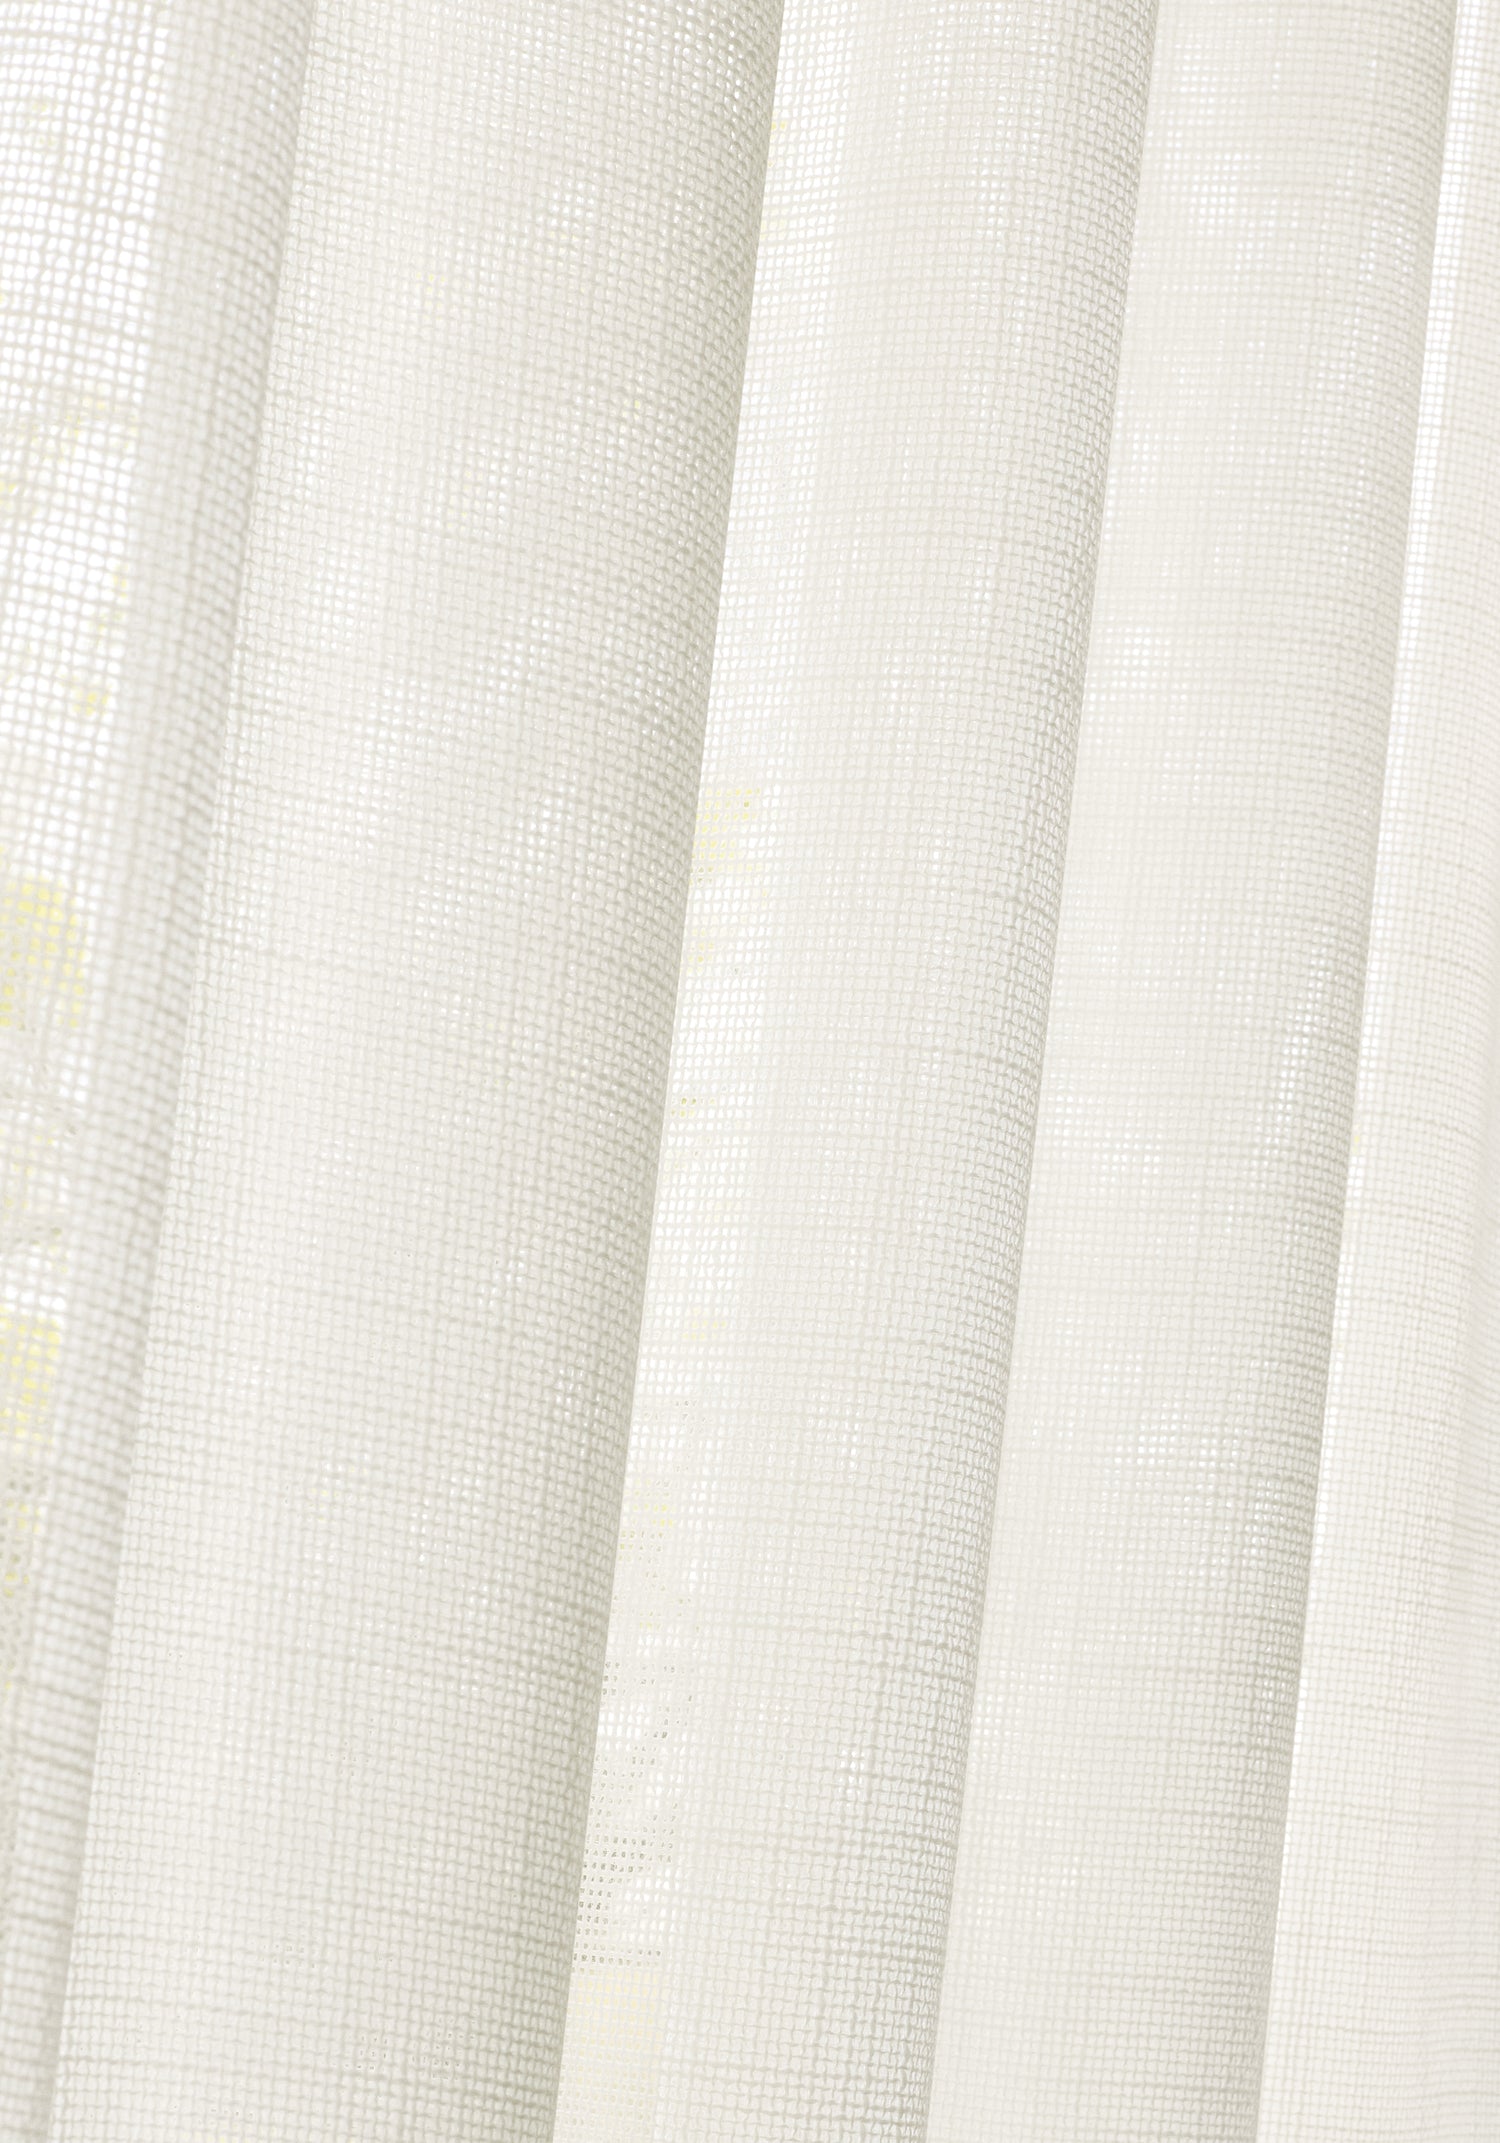 Up close sheer in Mistral fabric in ivory color - pattern number FWW8226 - by Thibaut in the Aura collection